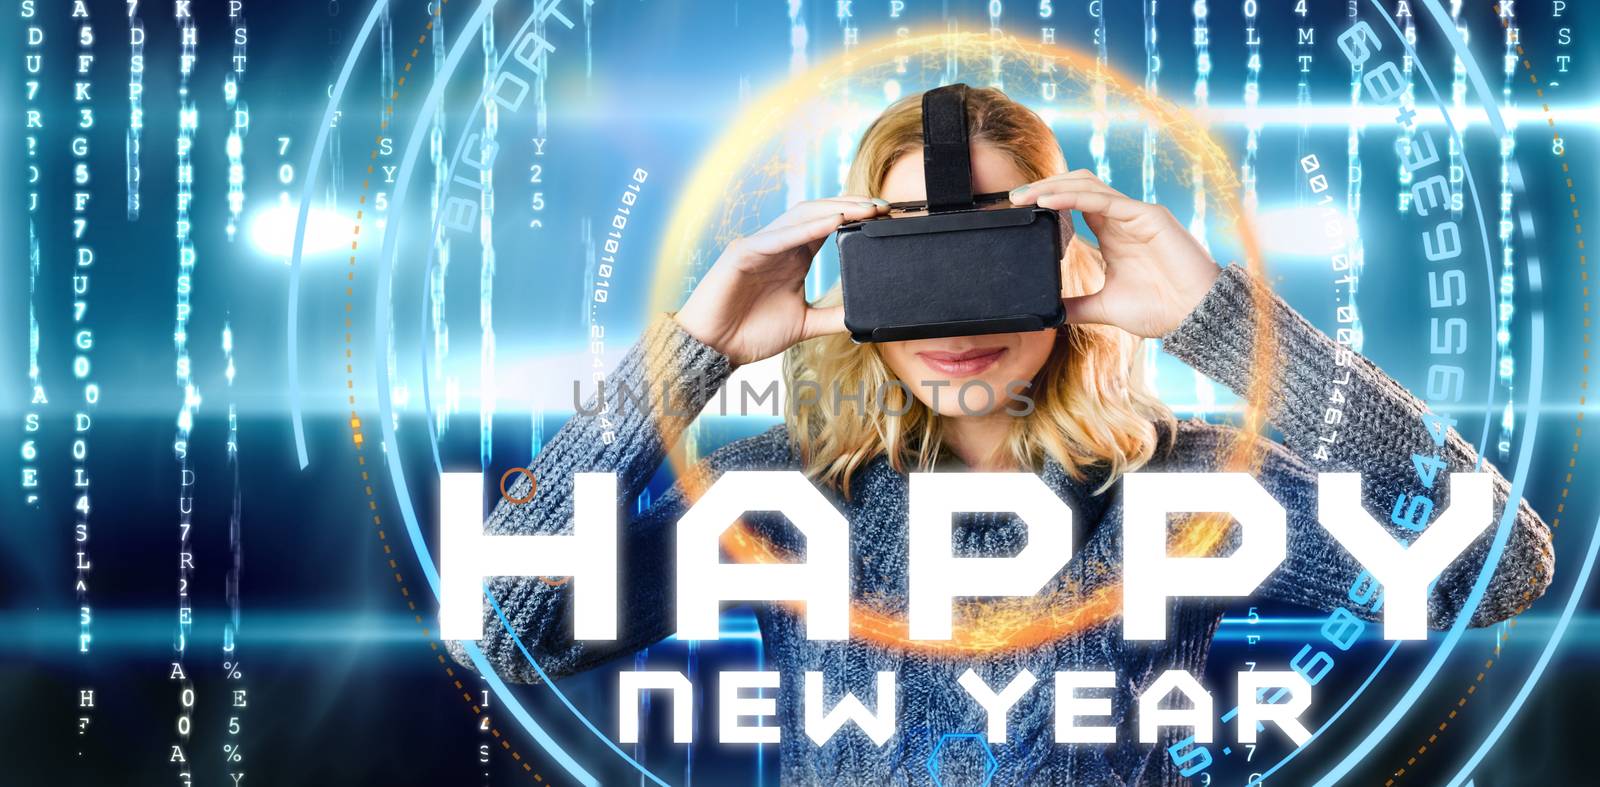 Composite image of smiling blond woman using virtual reality headset by Wavebreakmedia